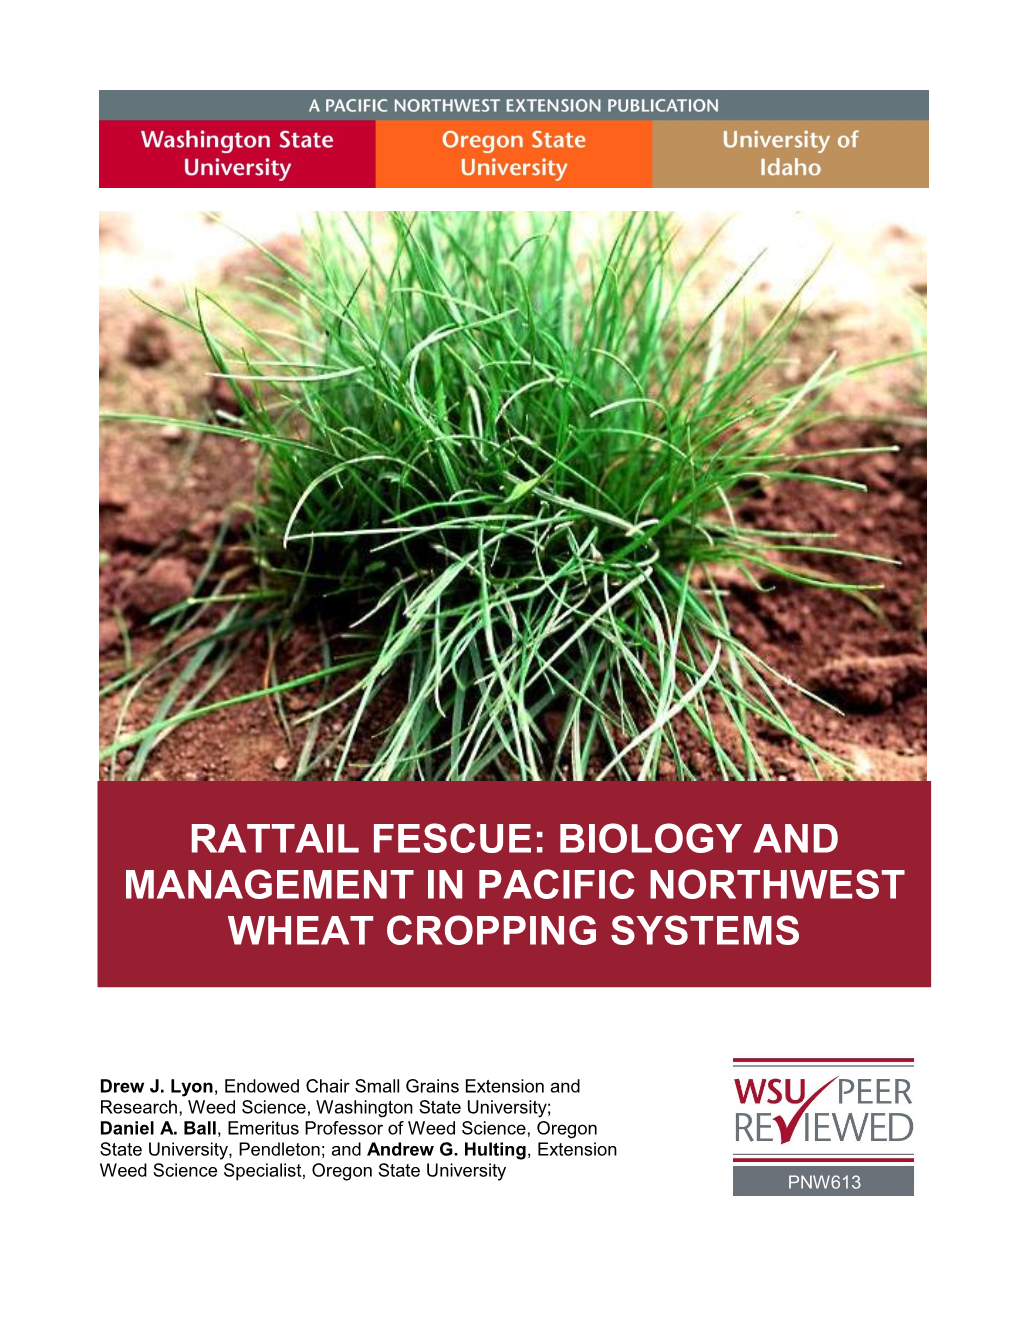 Rattail Fescue: Biology and Management in Pacific Northwest Wheat Cropping Systems